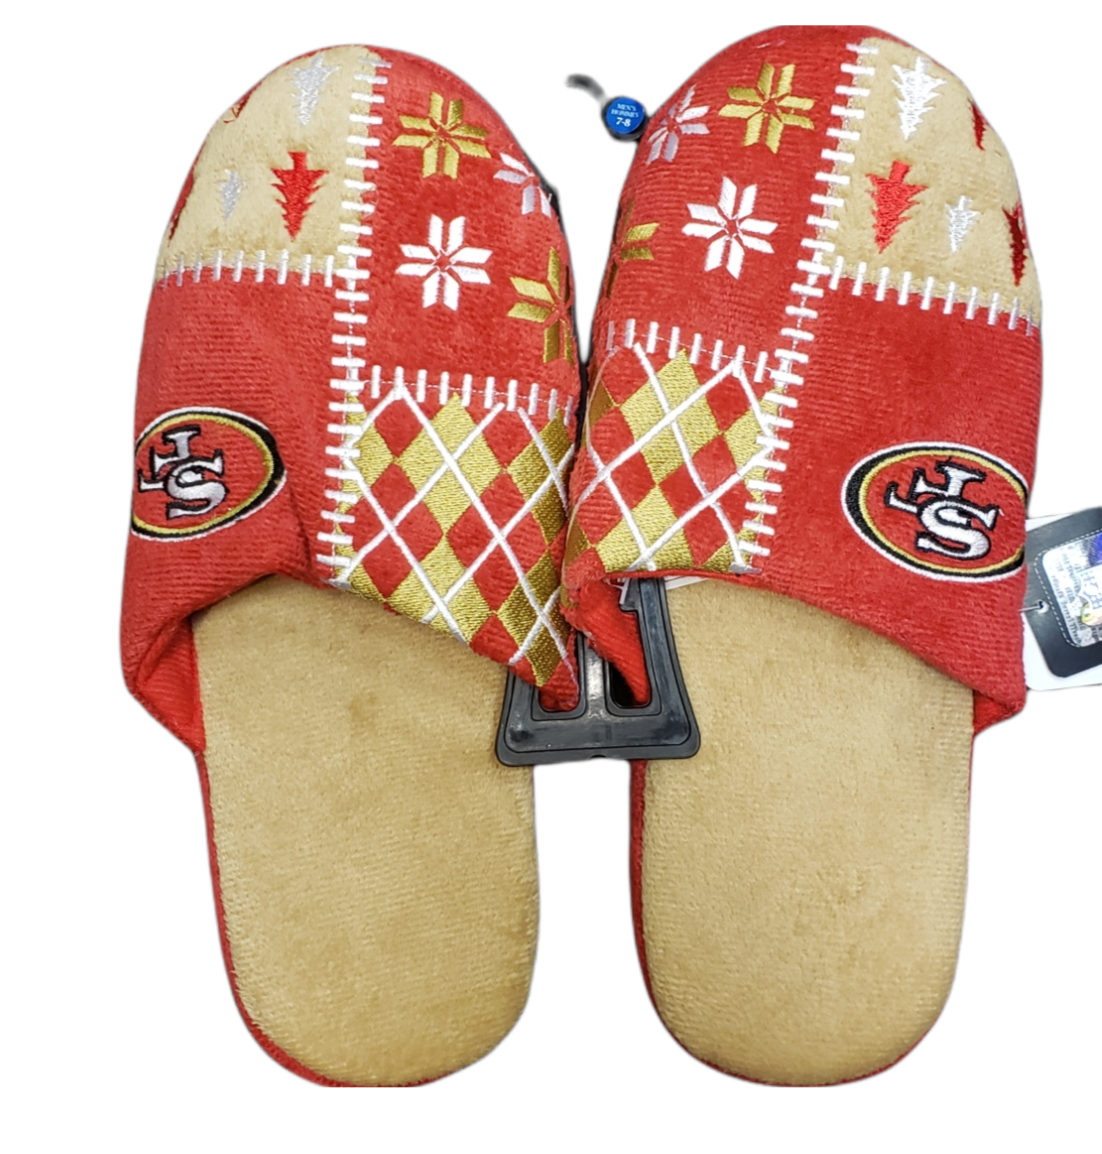 NFL Slippers "Ugly" Sweater 49ers